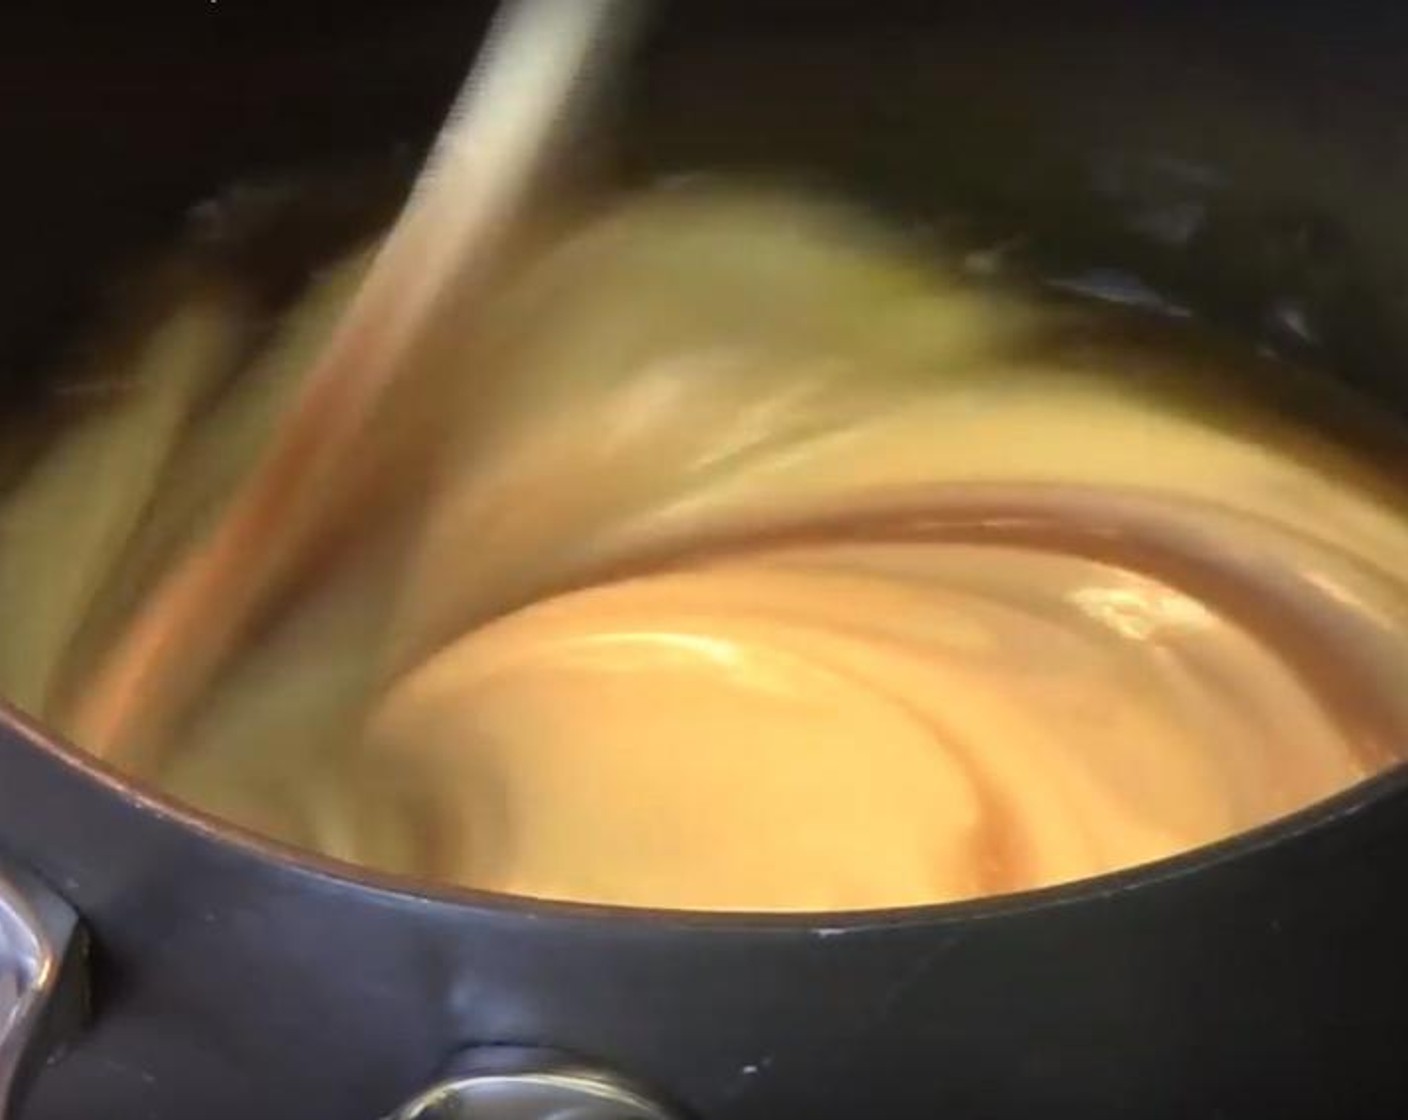 step 2 For the filling: Put Butter (1/3 cup) into a sauce pan. Add in Brown Sugar (1/2 cup) and stir until the butter has melted. Add in Sweetened Condensed Milk (1 1/3 cups) and stir it in. Stir over a low heat for about five minutes.